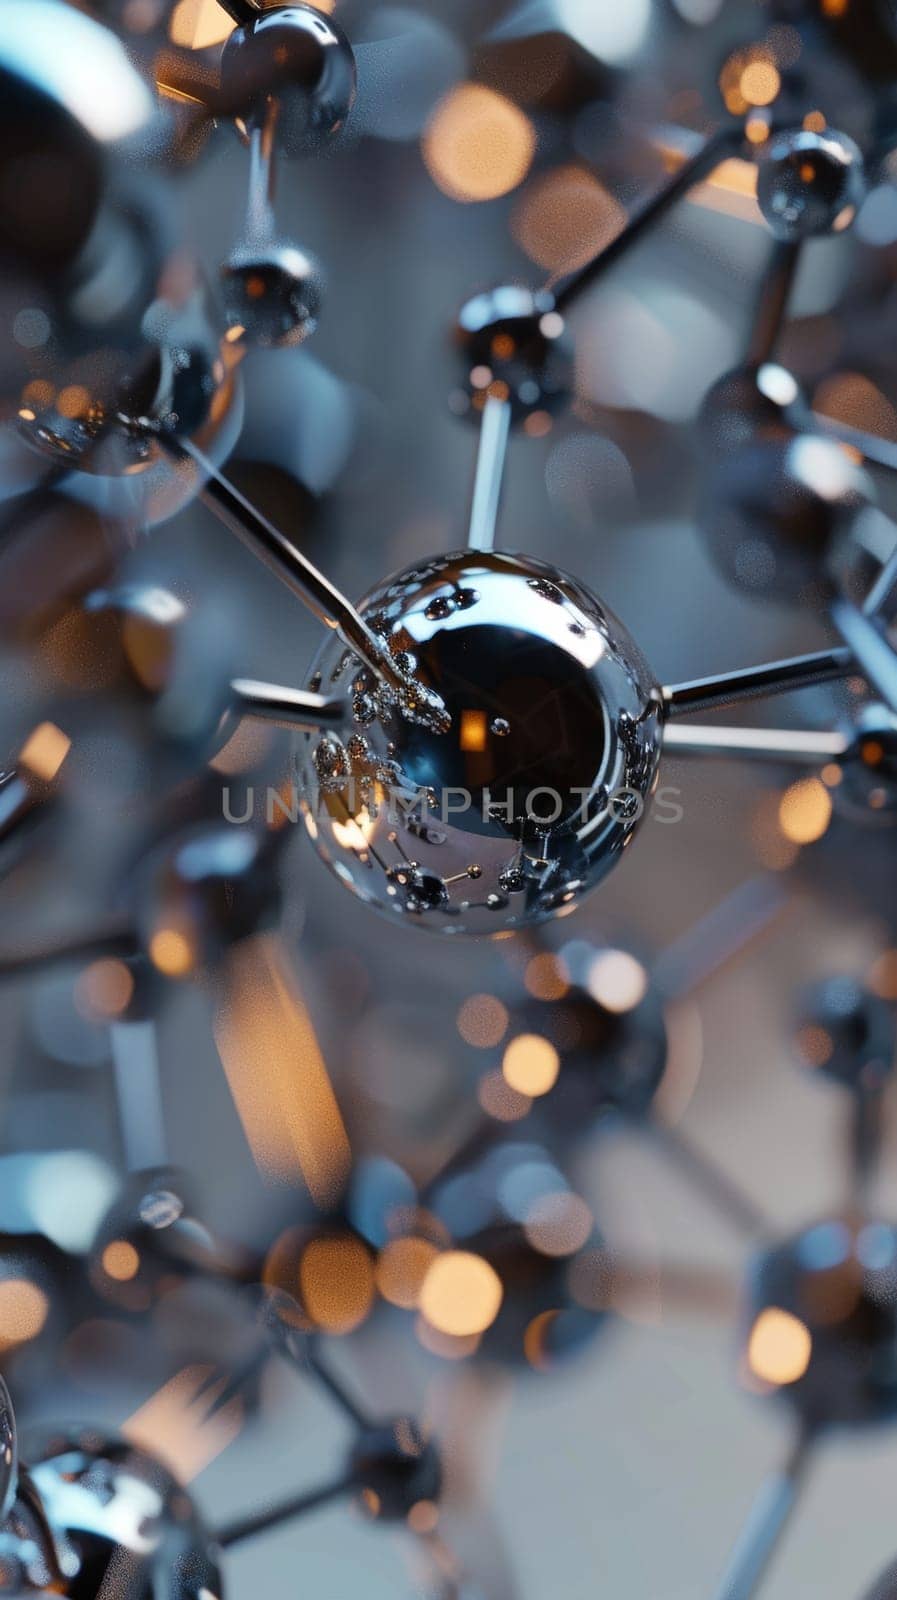 A close-up view features a detailed metallic molecular model with a bokeh background, emphasizing the reflections on the shiny surfaces